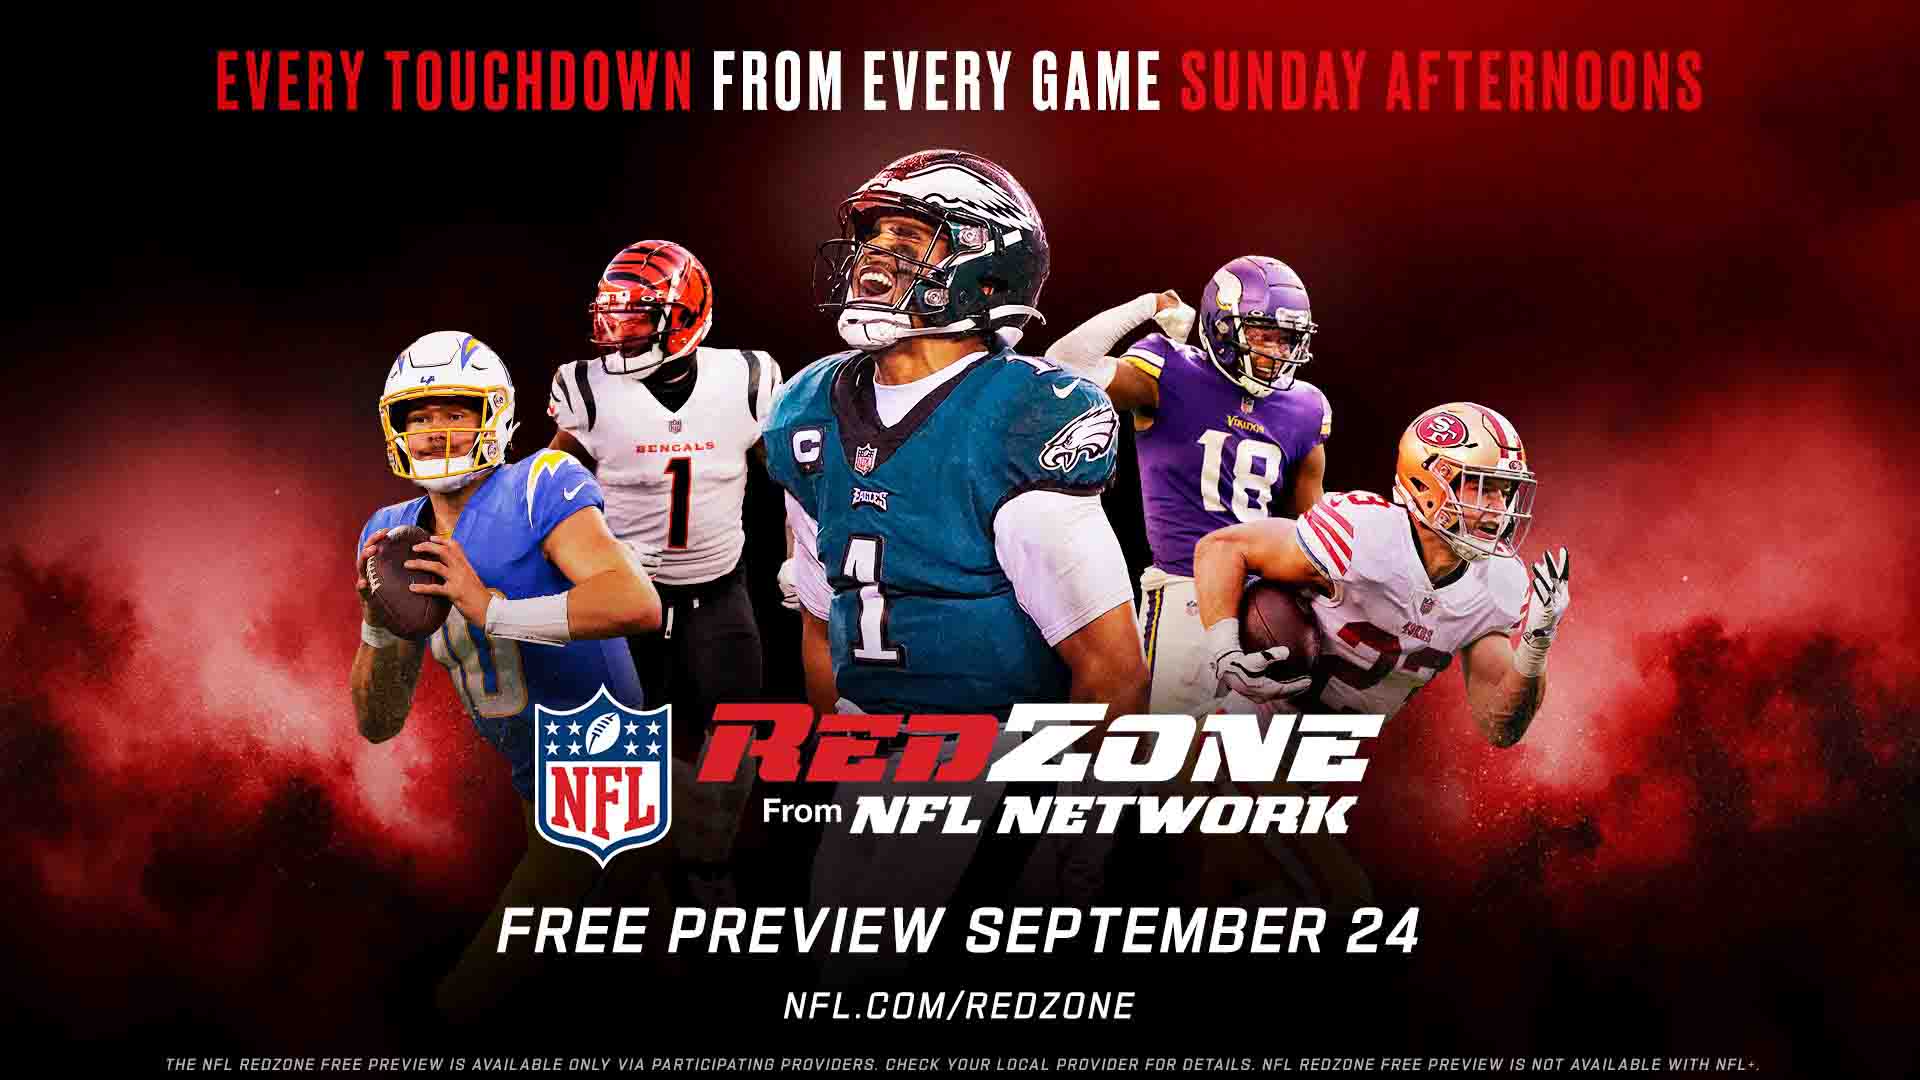 how can i watch nfl games today for free